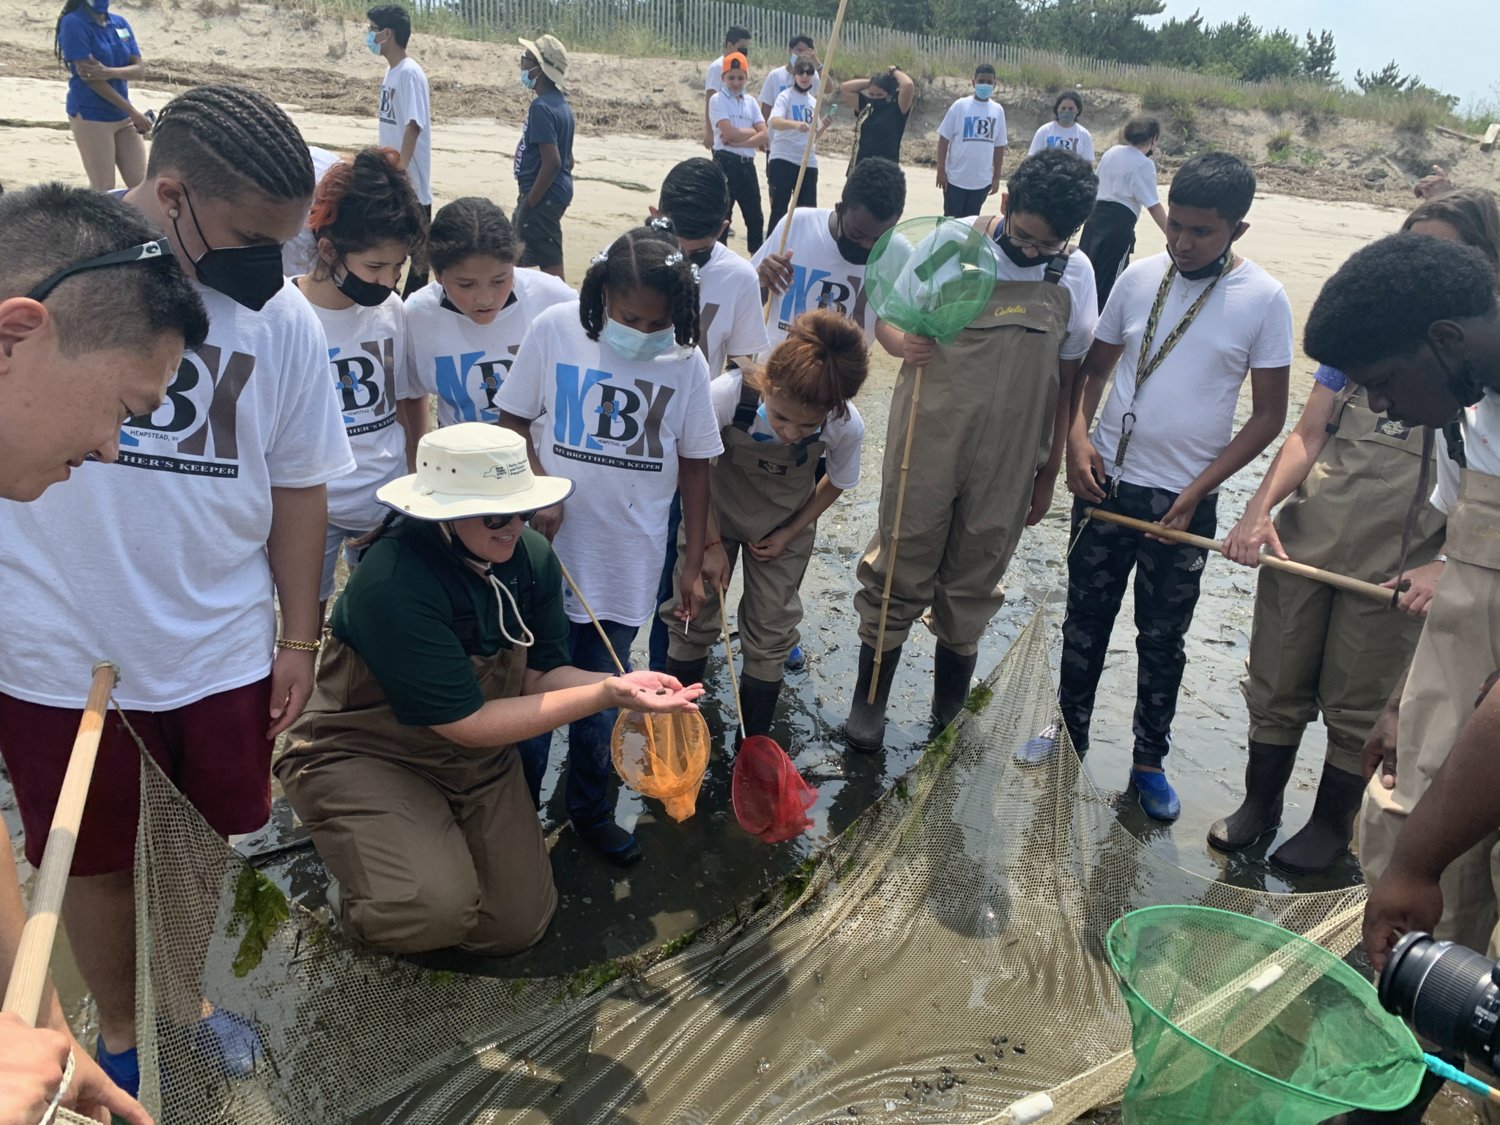 Marissa DeBonis, Environmental Educator Assistant at the Jones Beach Energy & Nature Center, shows a group of students wildlife that were caught during a beach seining activity at the West End Boat Basin at Jones Beach State Park.